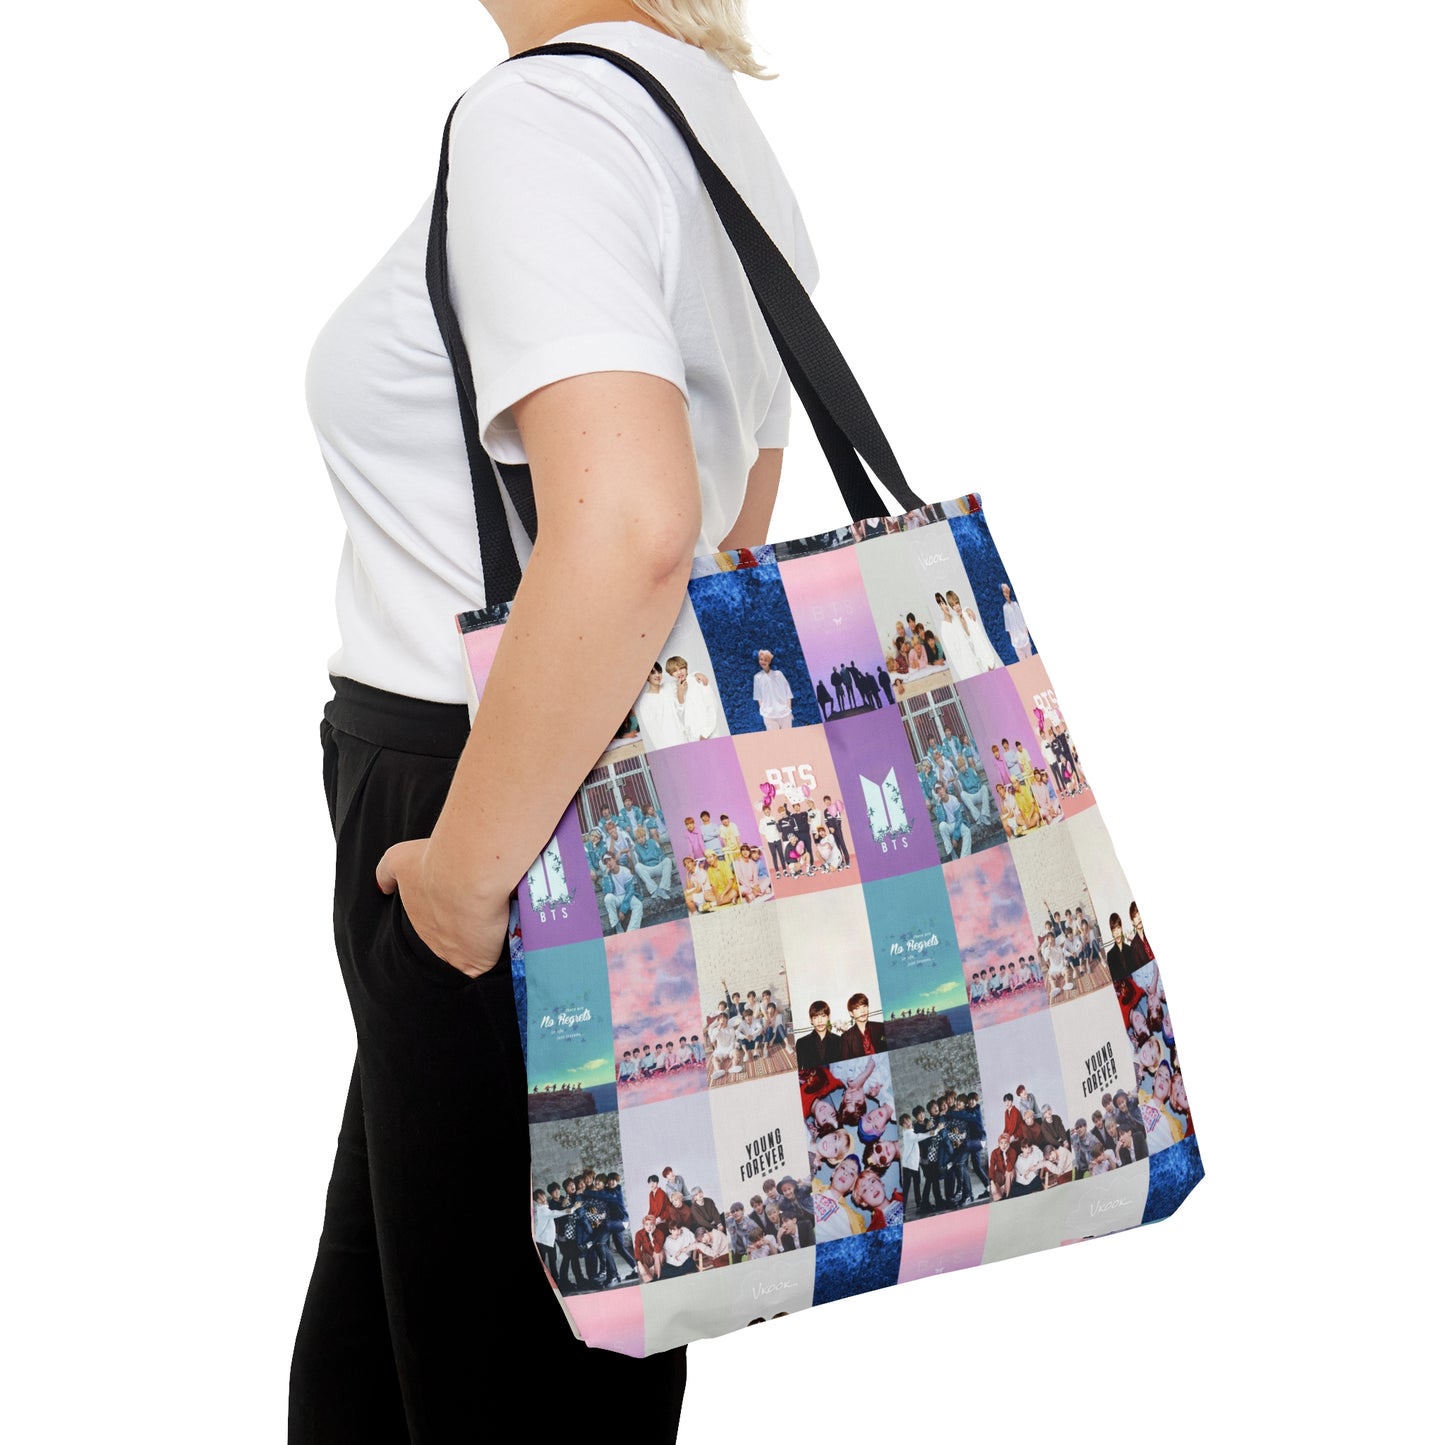 BTS Pastel Aesthetic Collage Tote Bag